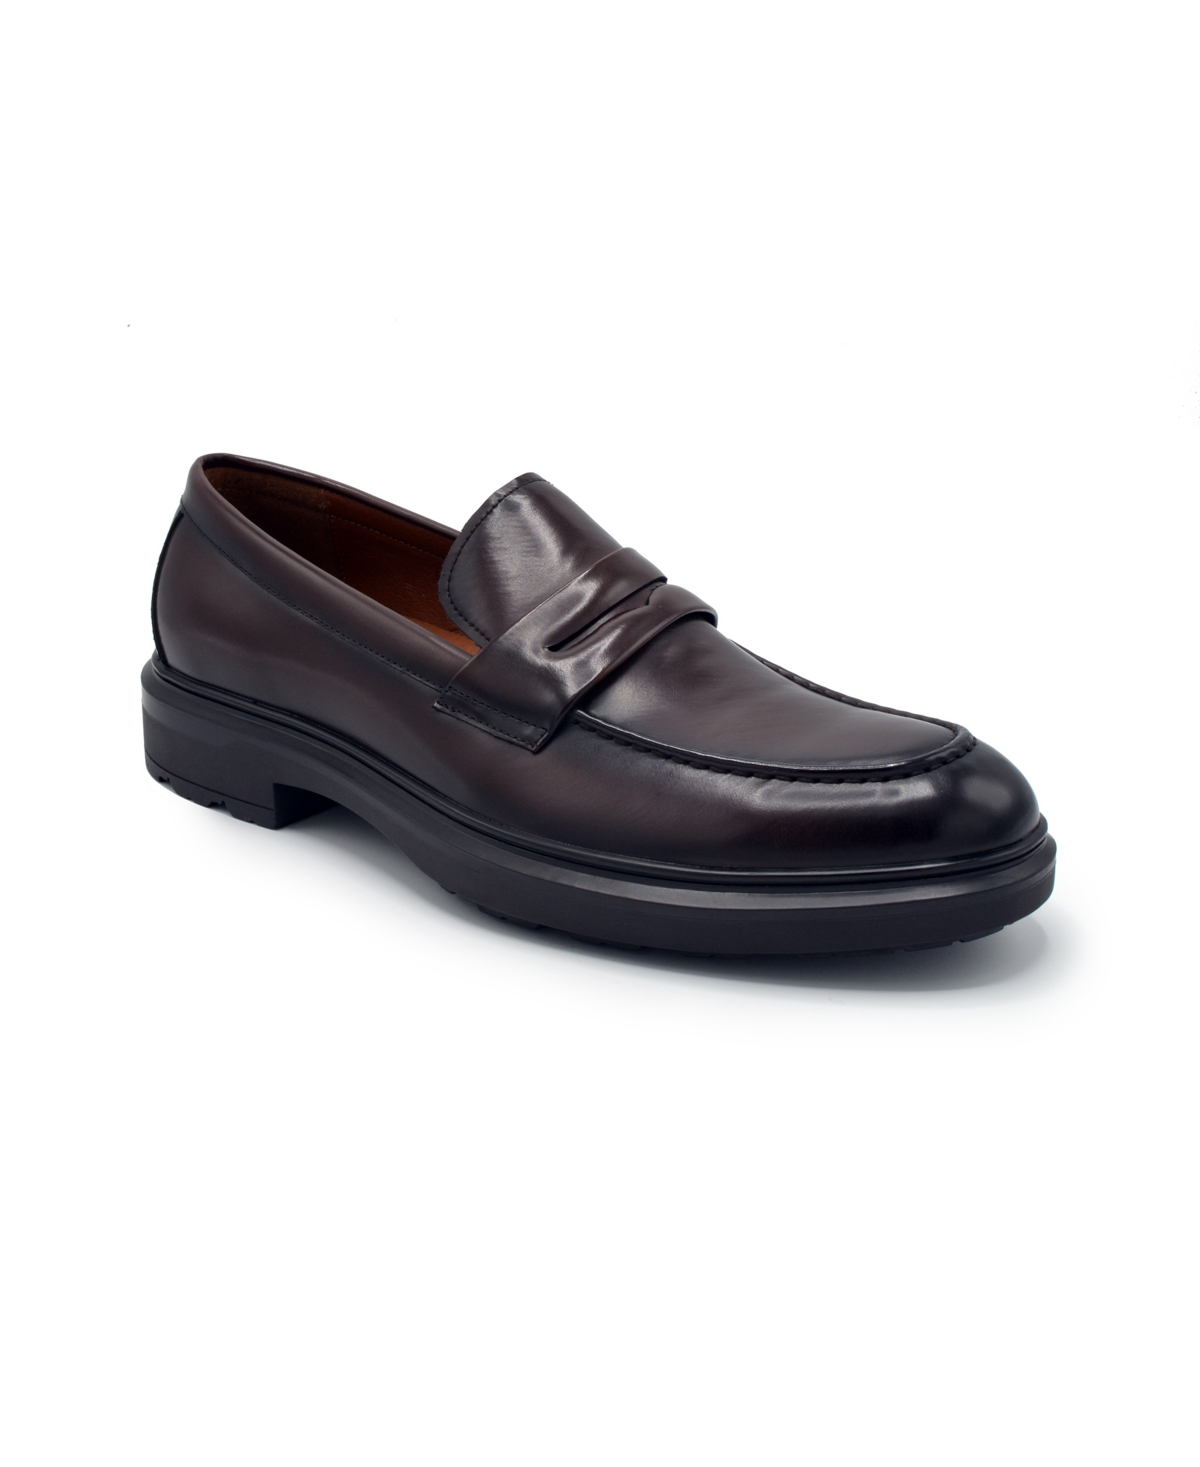 Men's Tuscan Penny Loafer Dress Shoes - Brown